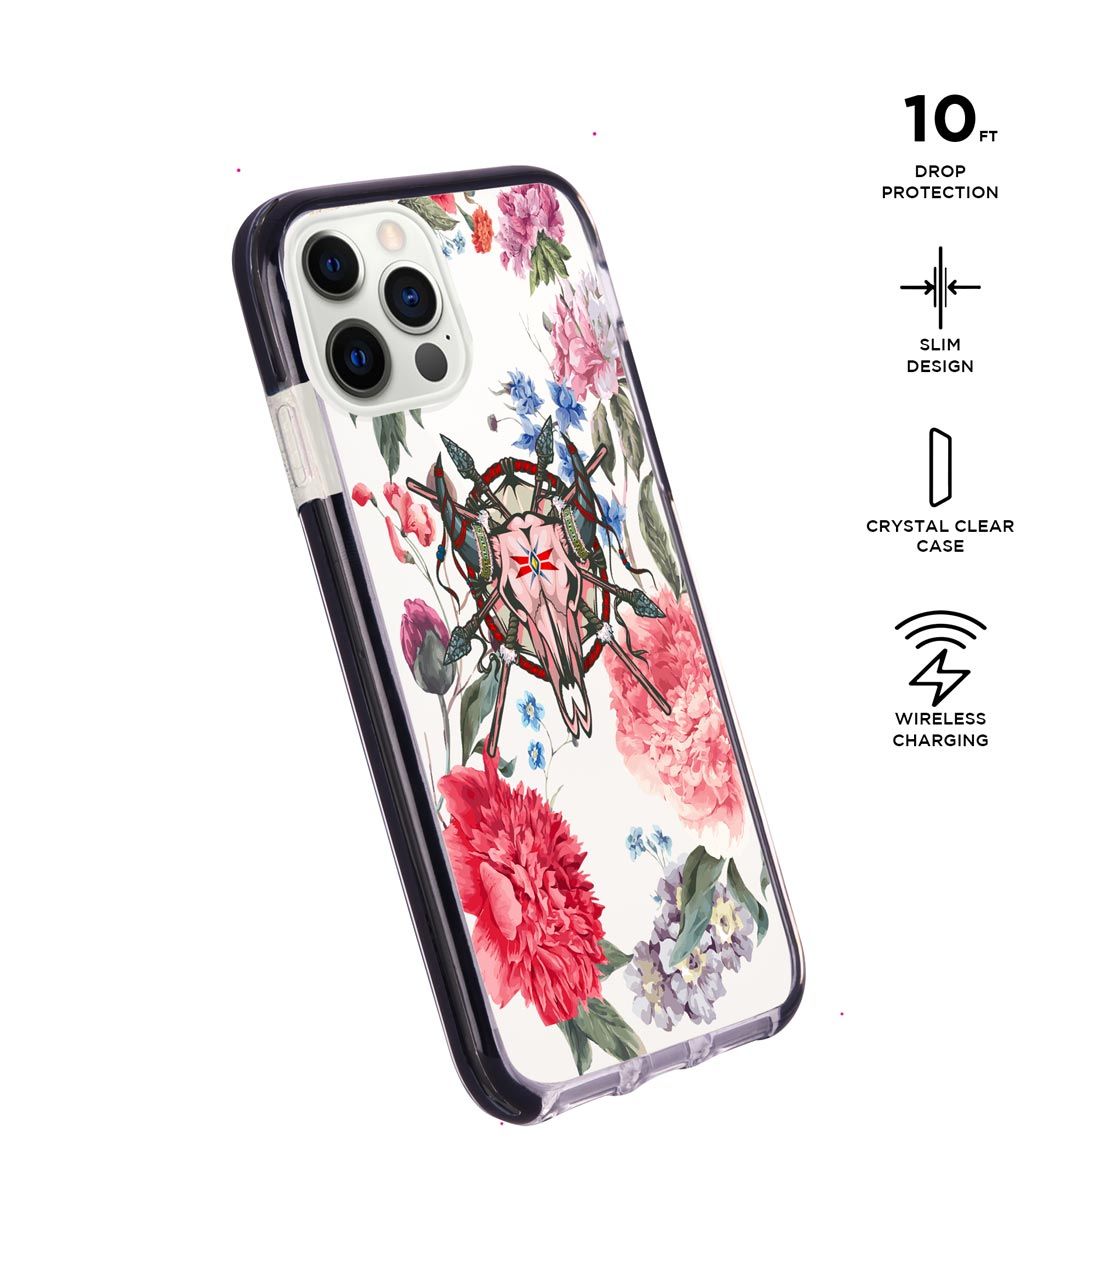 Floral Symmetry - Extreme Case for iPhone 12 Pro Max